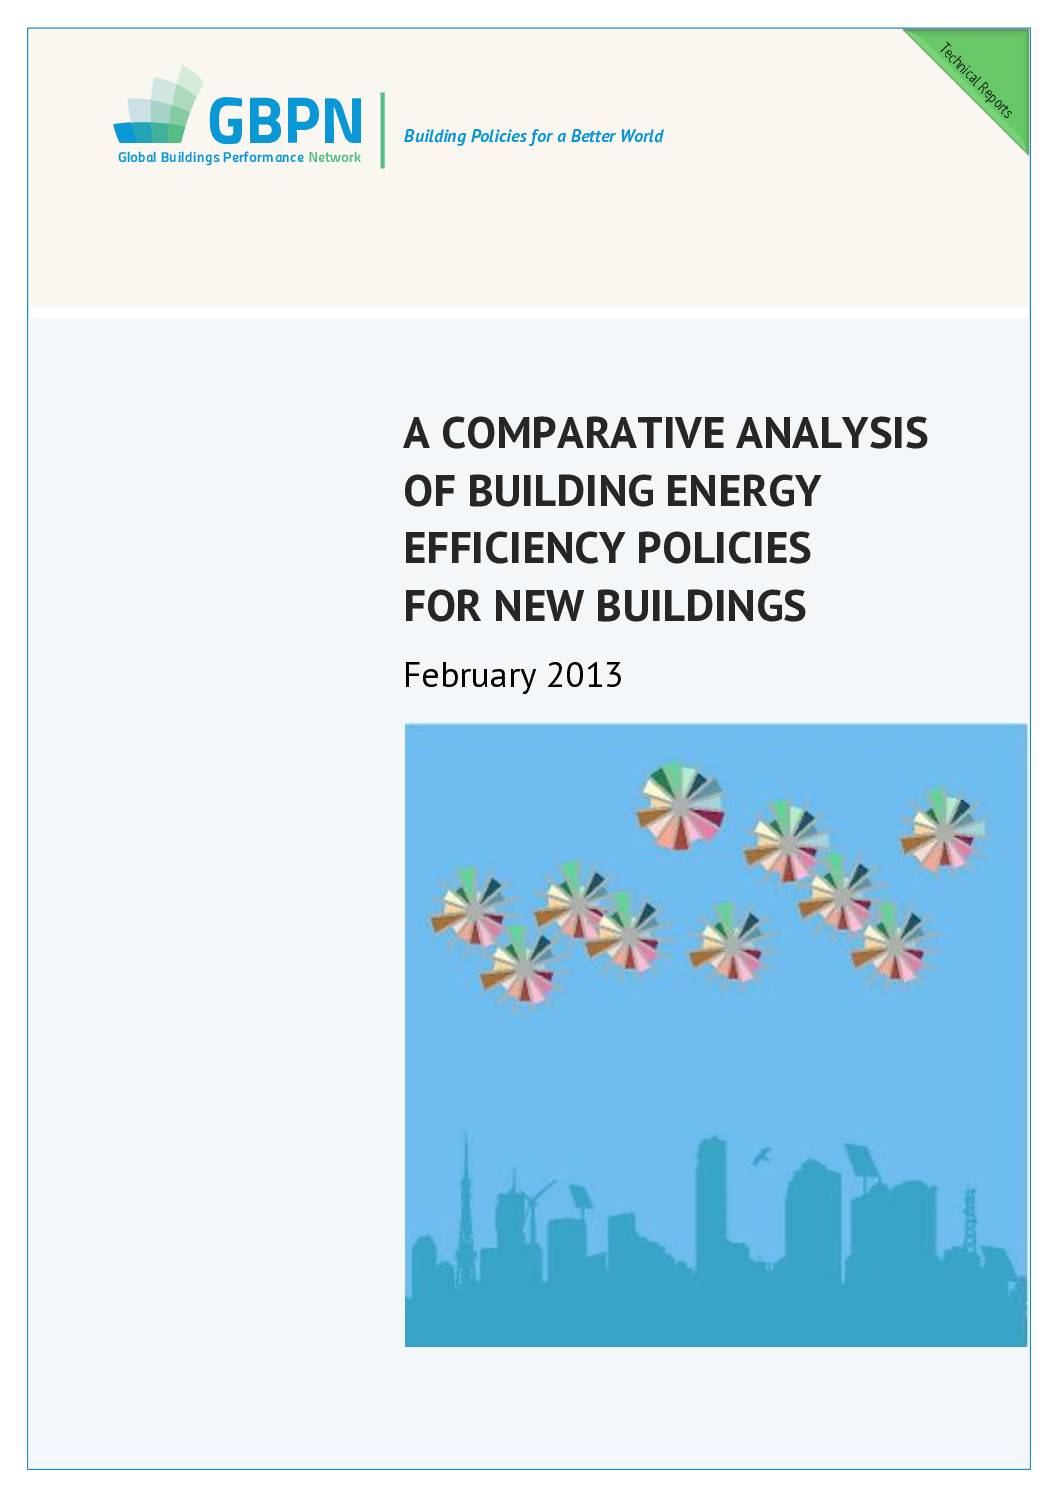 A Comparative Analysis of Building Energy Efficiency Policies for New Buildings